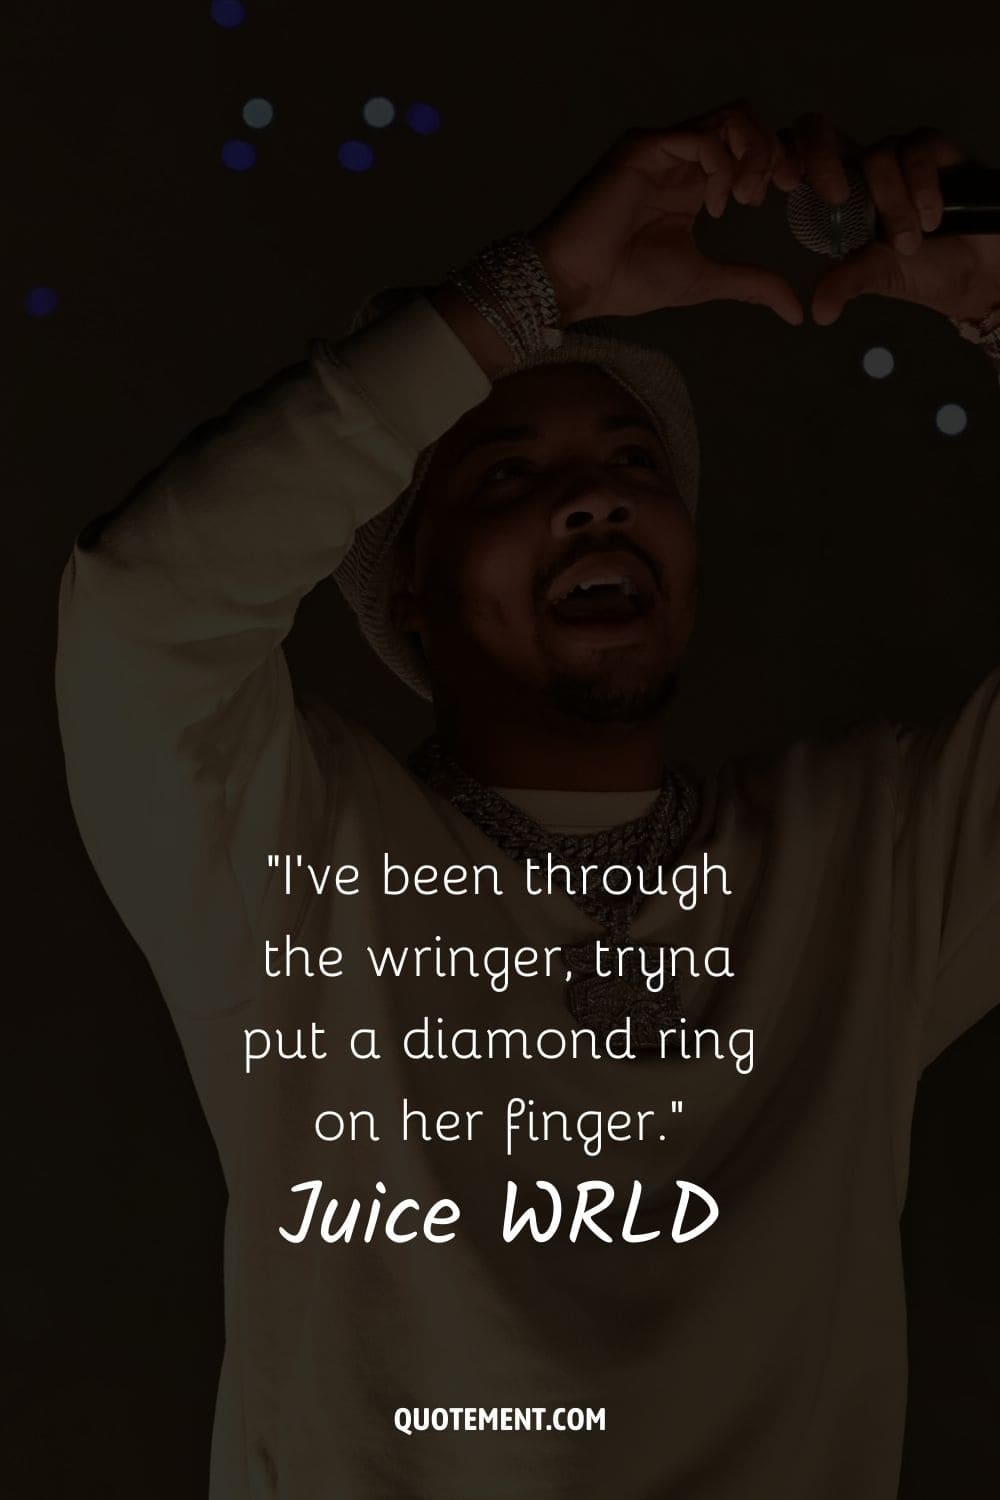 I’ve been through the wringer, tryna put a diamond ring on her finger.